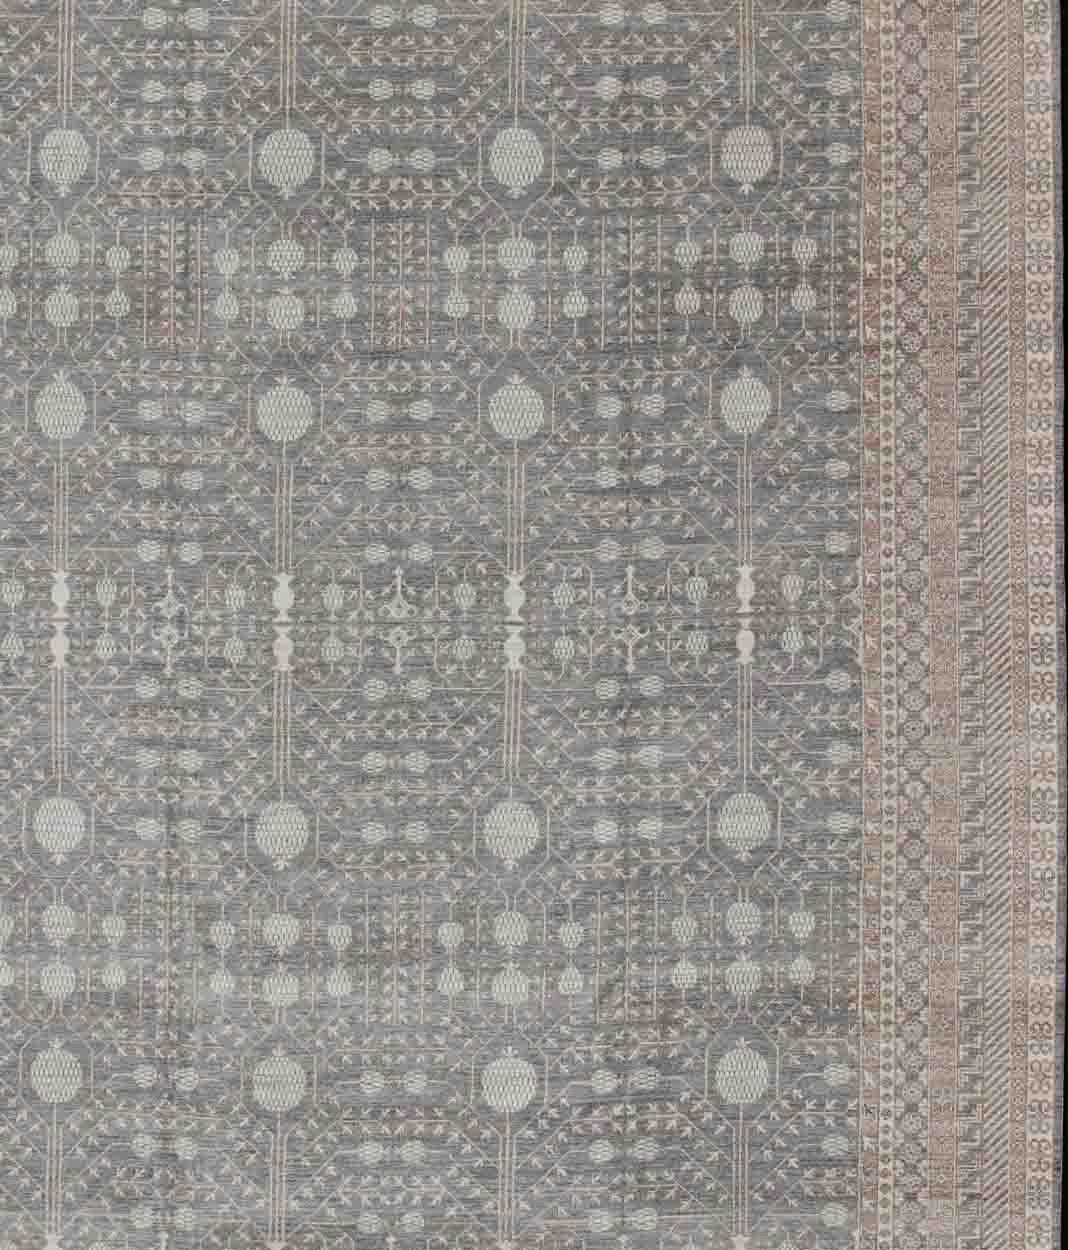 Large Khotan Rug with all over Pomegranate Design. rug MP-1910-21481, country of origin / type: Afghanistan / Khotan

This Khotan features an all over Pomegranate Design flanked by a repeating pattern in the border. The entirety of the piece is